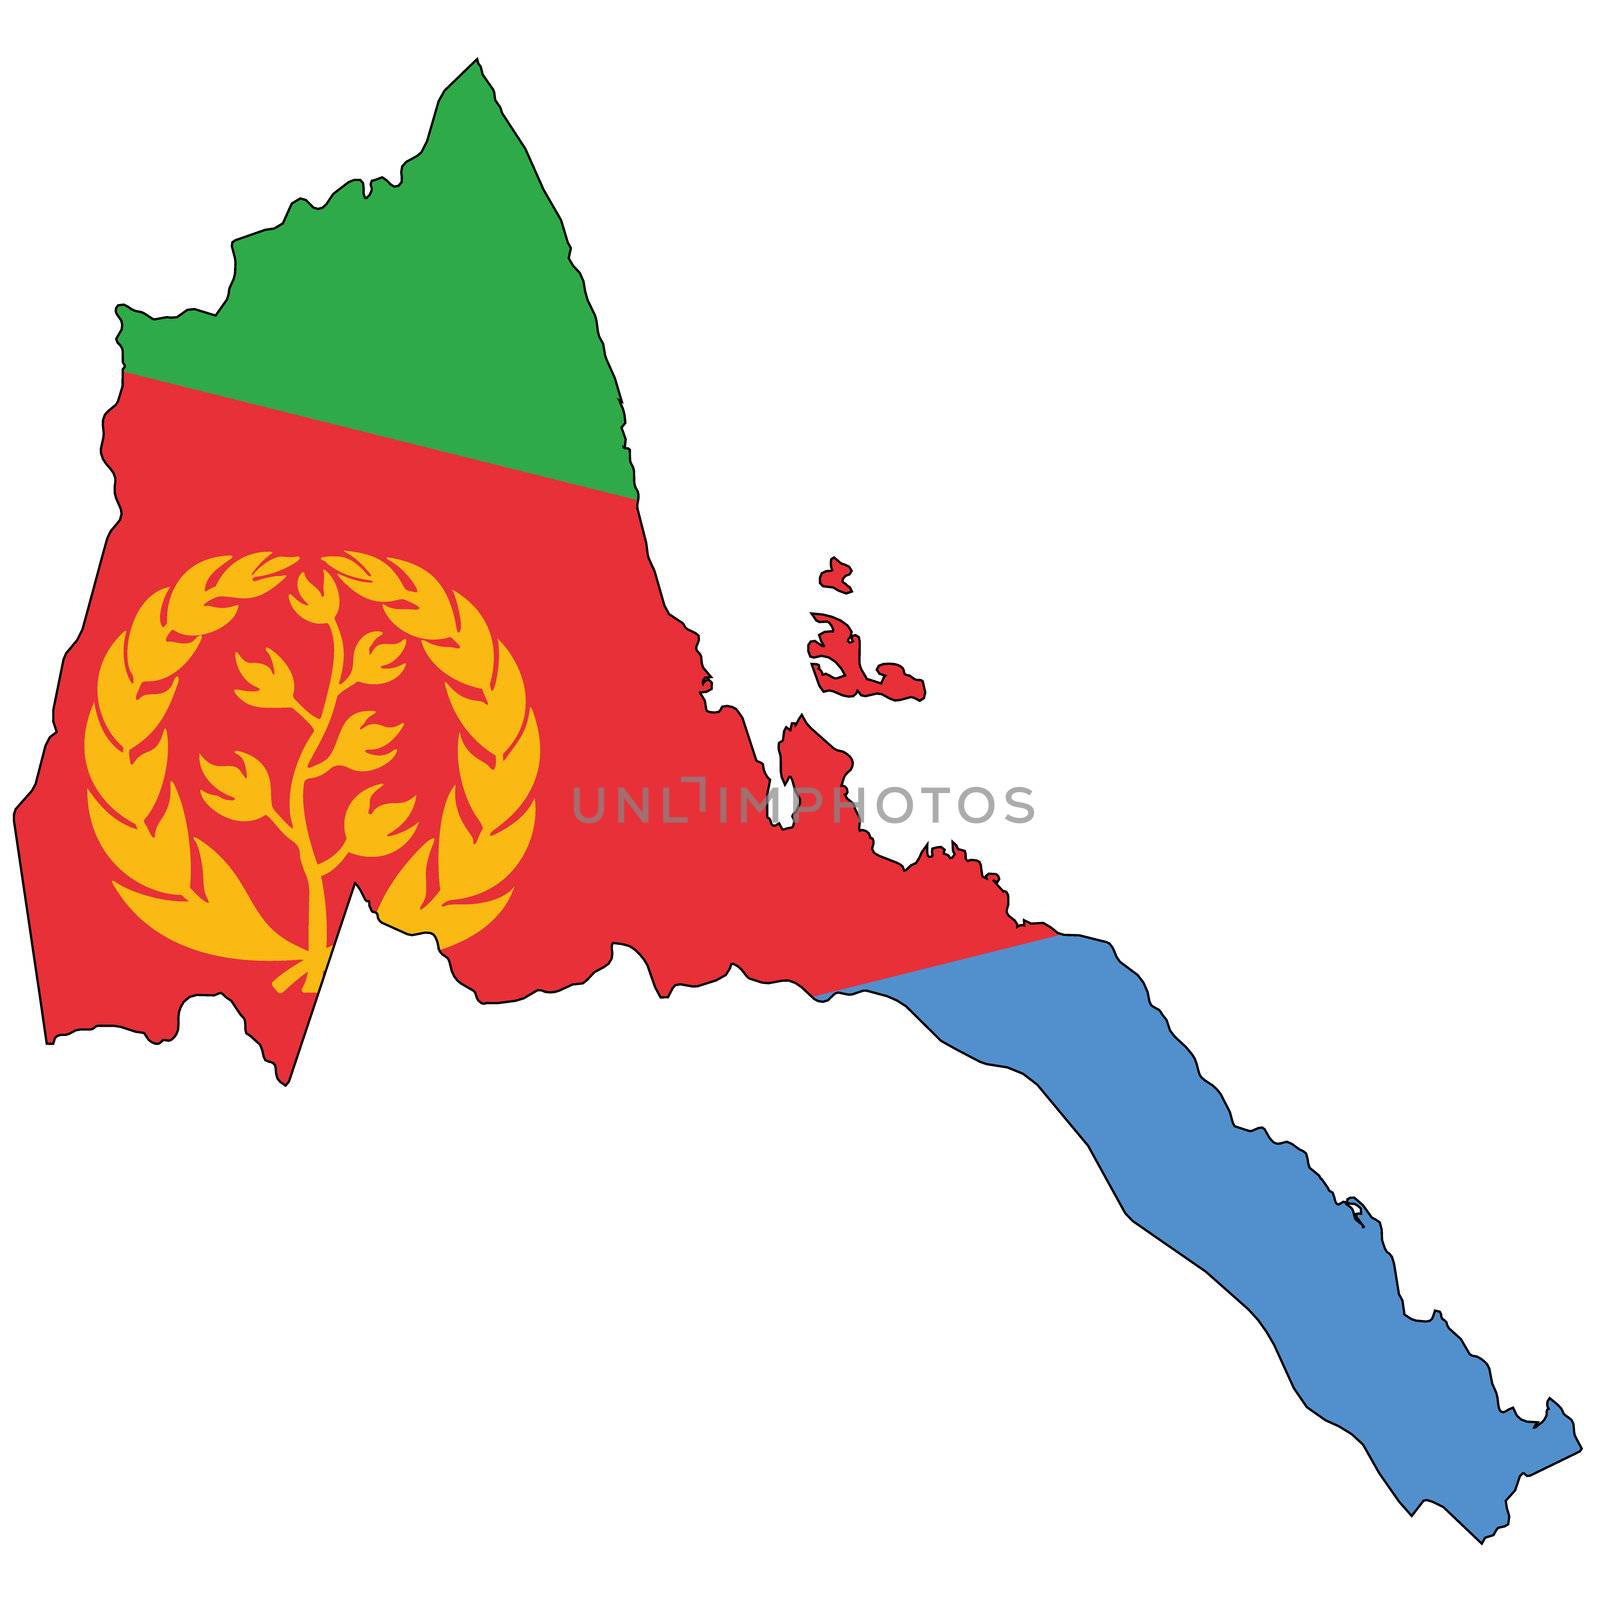 Country outline with the flag of Eritrea in it